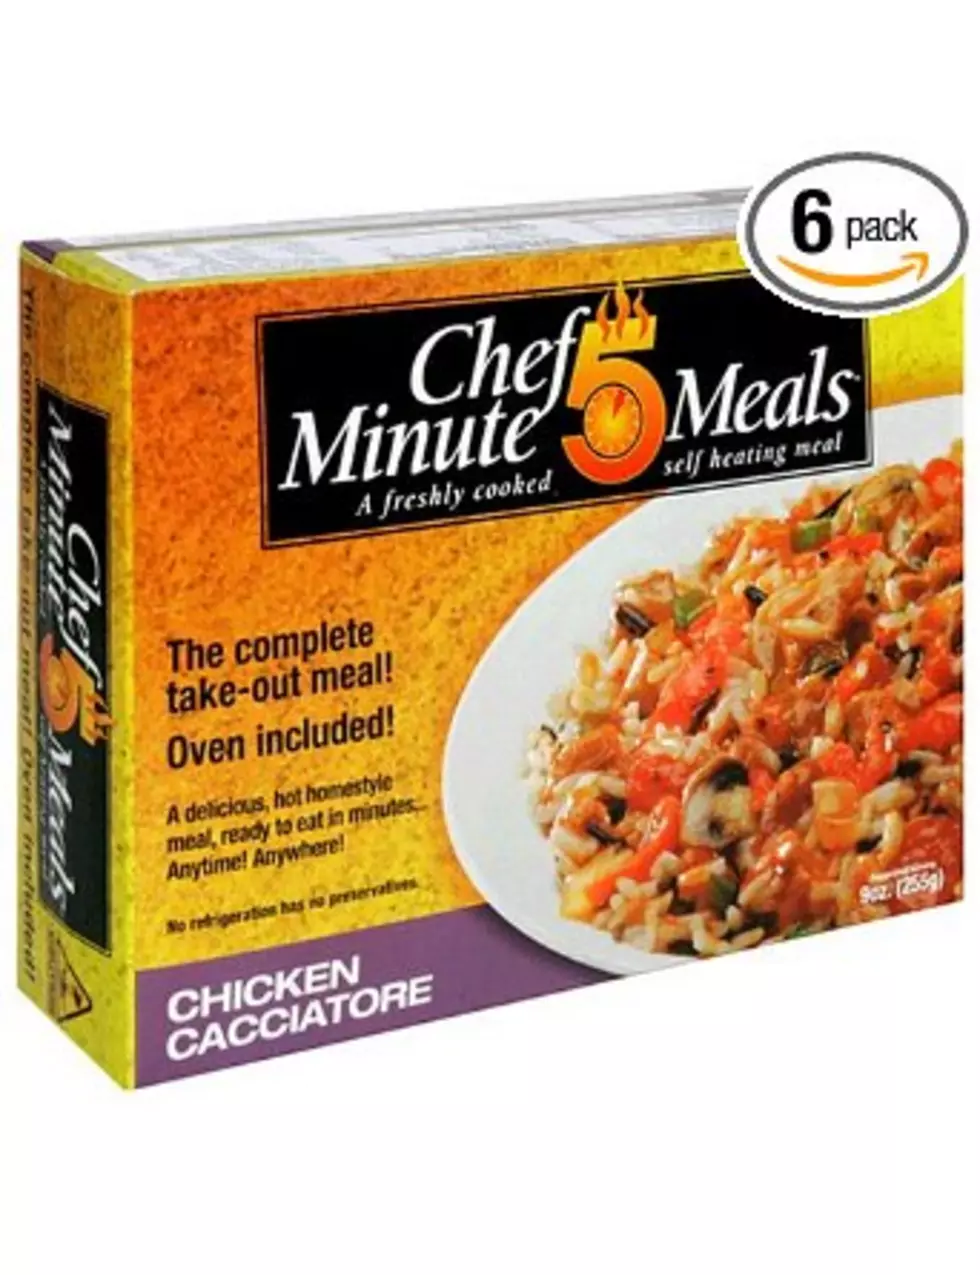 Chef 5 Minute Meals Self Heat Great During a Power Outage [REVIEW]